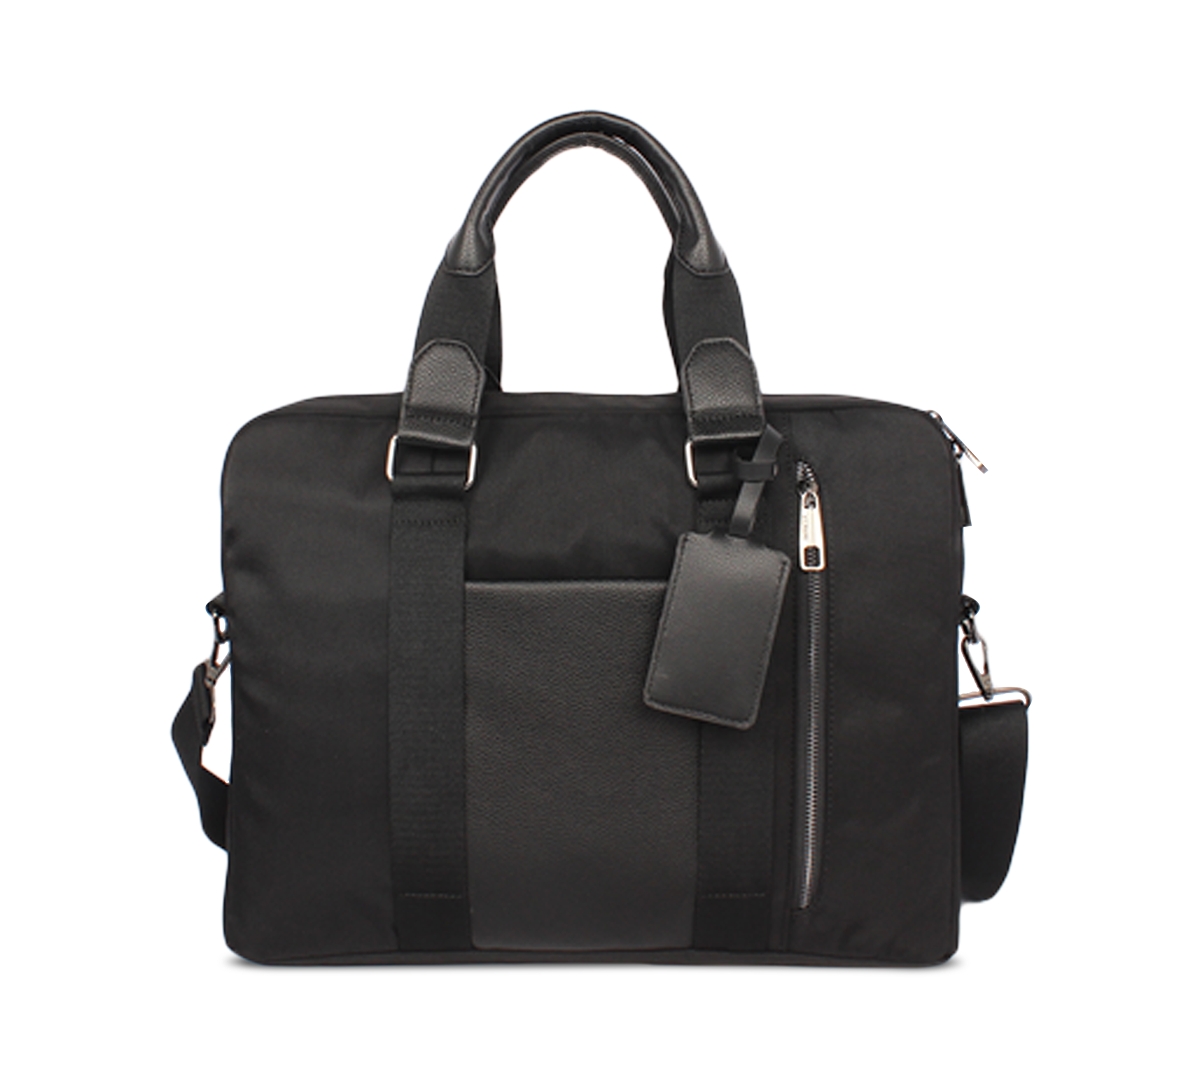 Men's Briefcase, Created for Macy's - Black